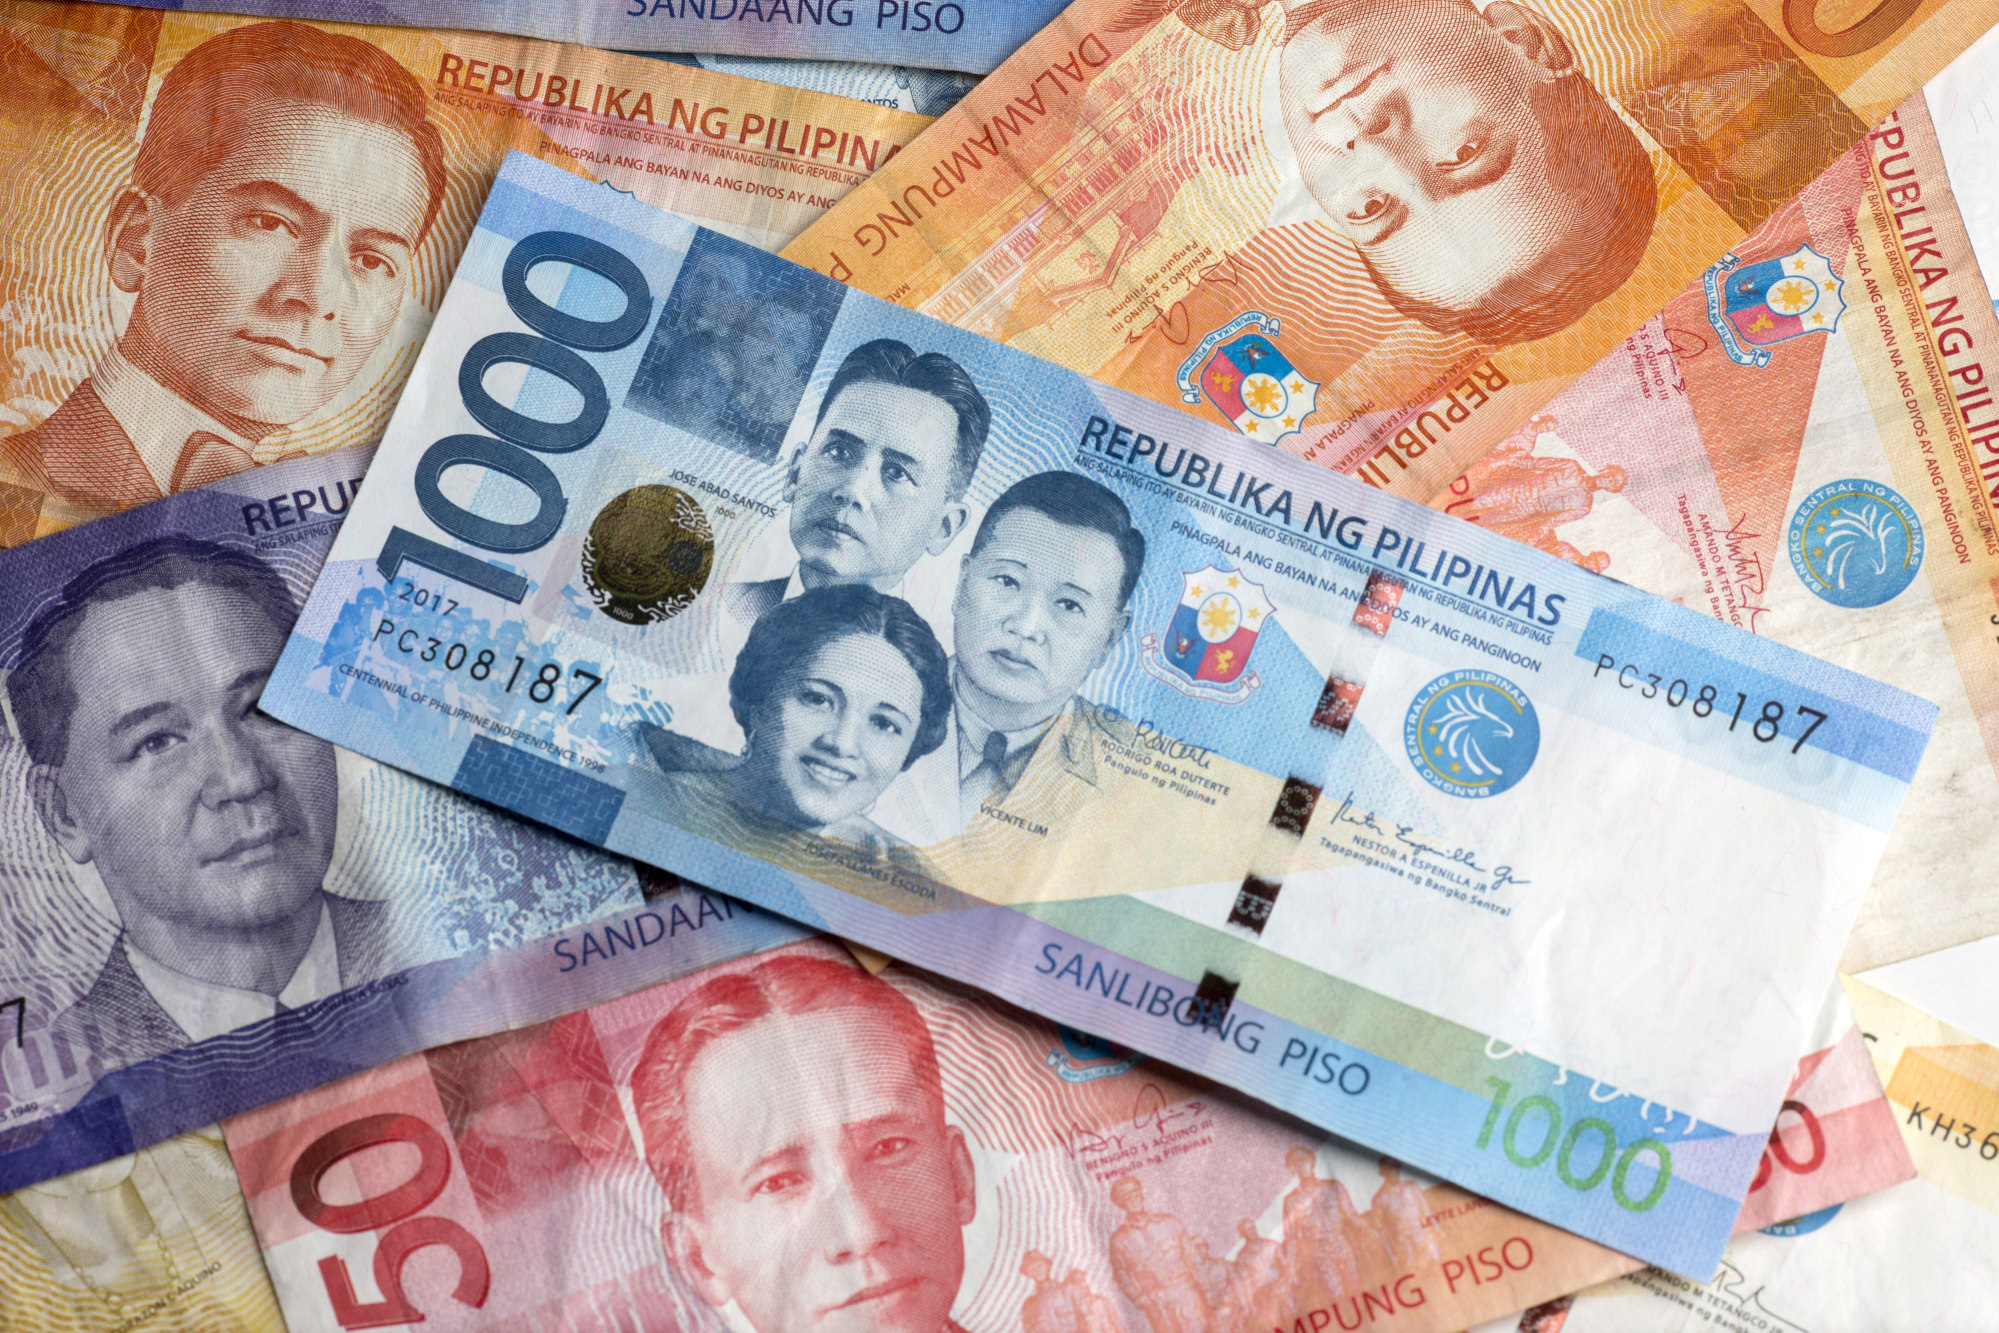 PHP/USD: Philippine Peso's Slide Stops at Key Support Level - Bloomberg